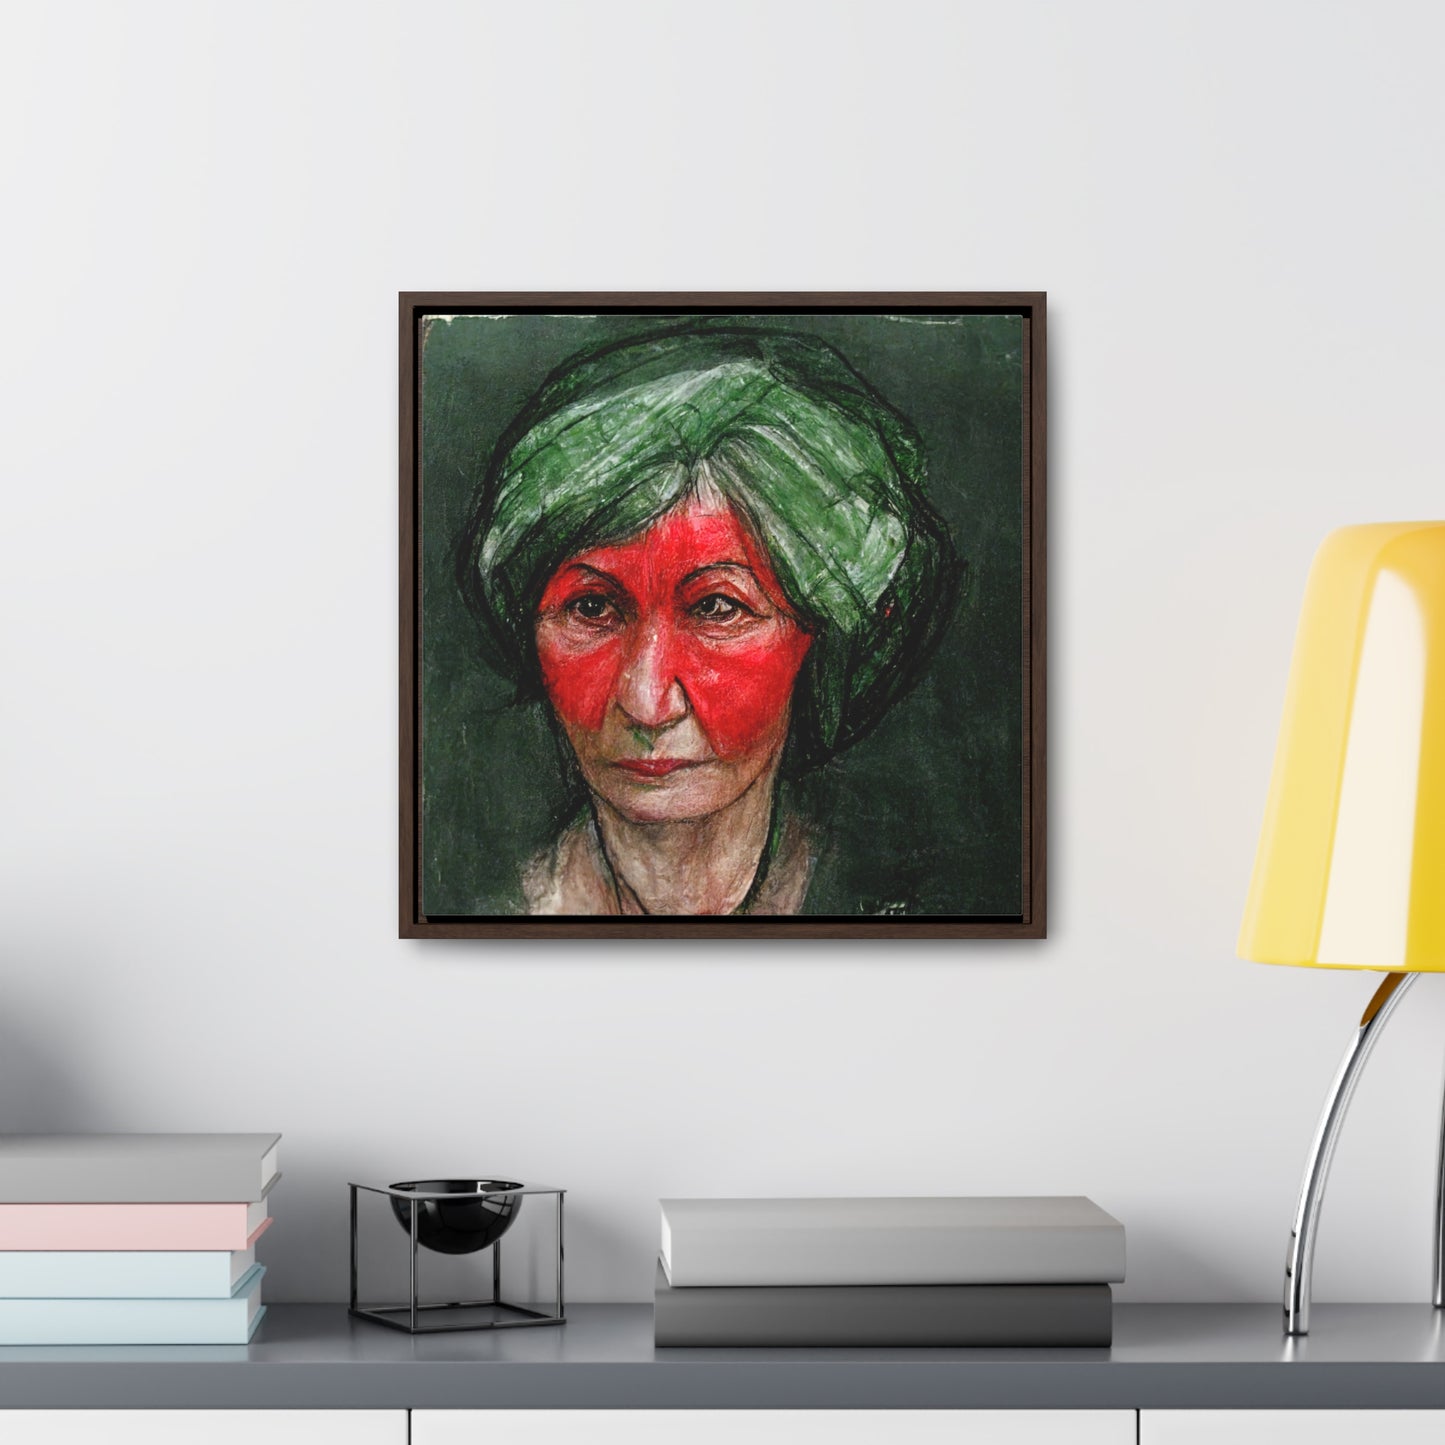 Loneliness Green Red 41, Valentinii, Gallery Canvas Wraps, Square Frame